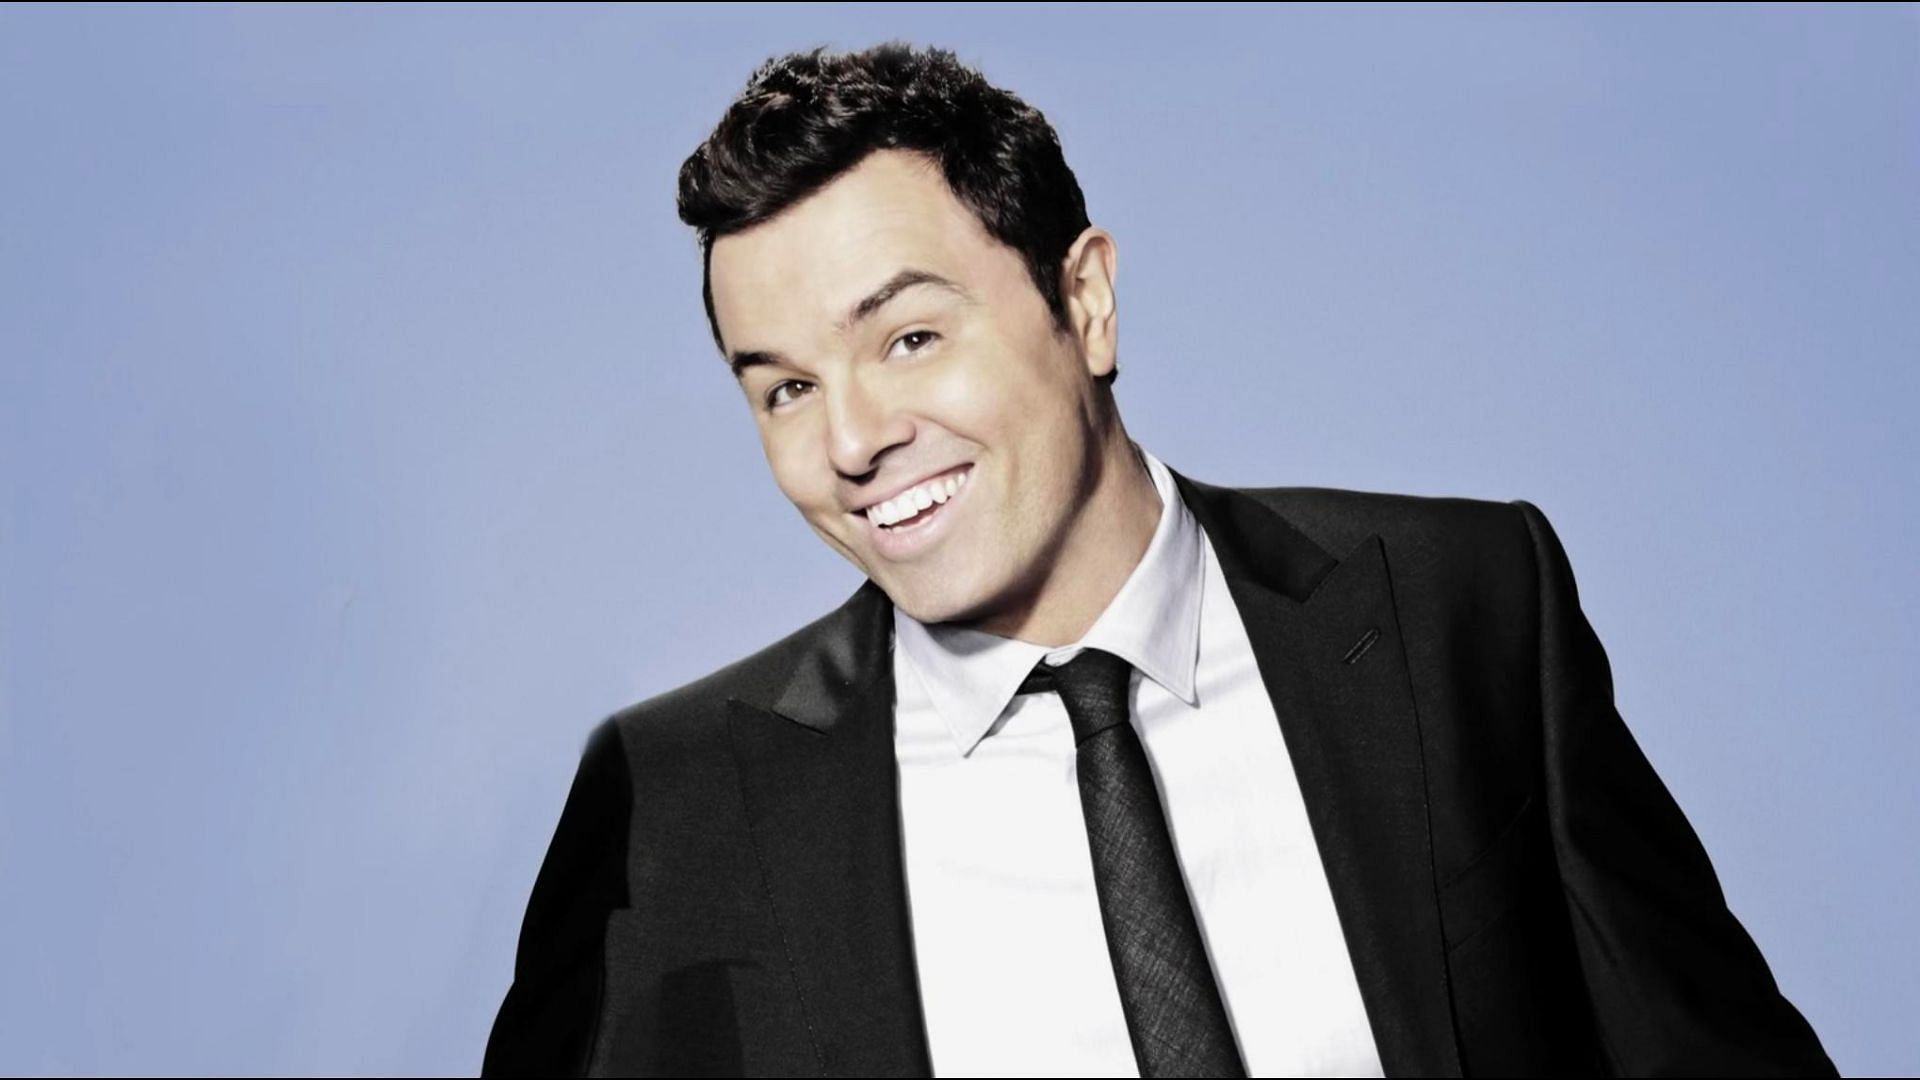 Seth MacFarlane (known for American Dad) takes on the role of Ted. (Image via MDb)